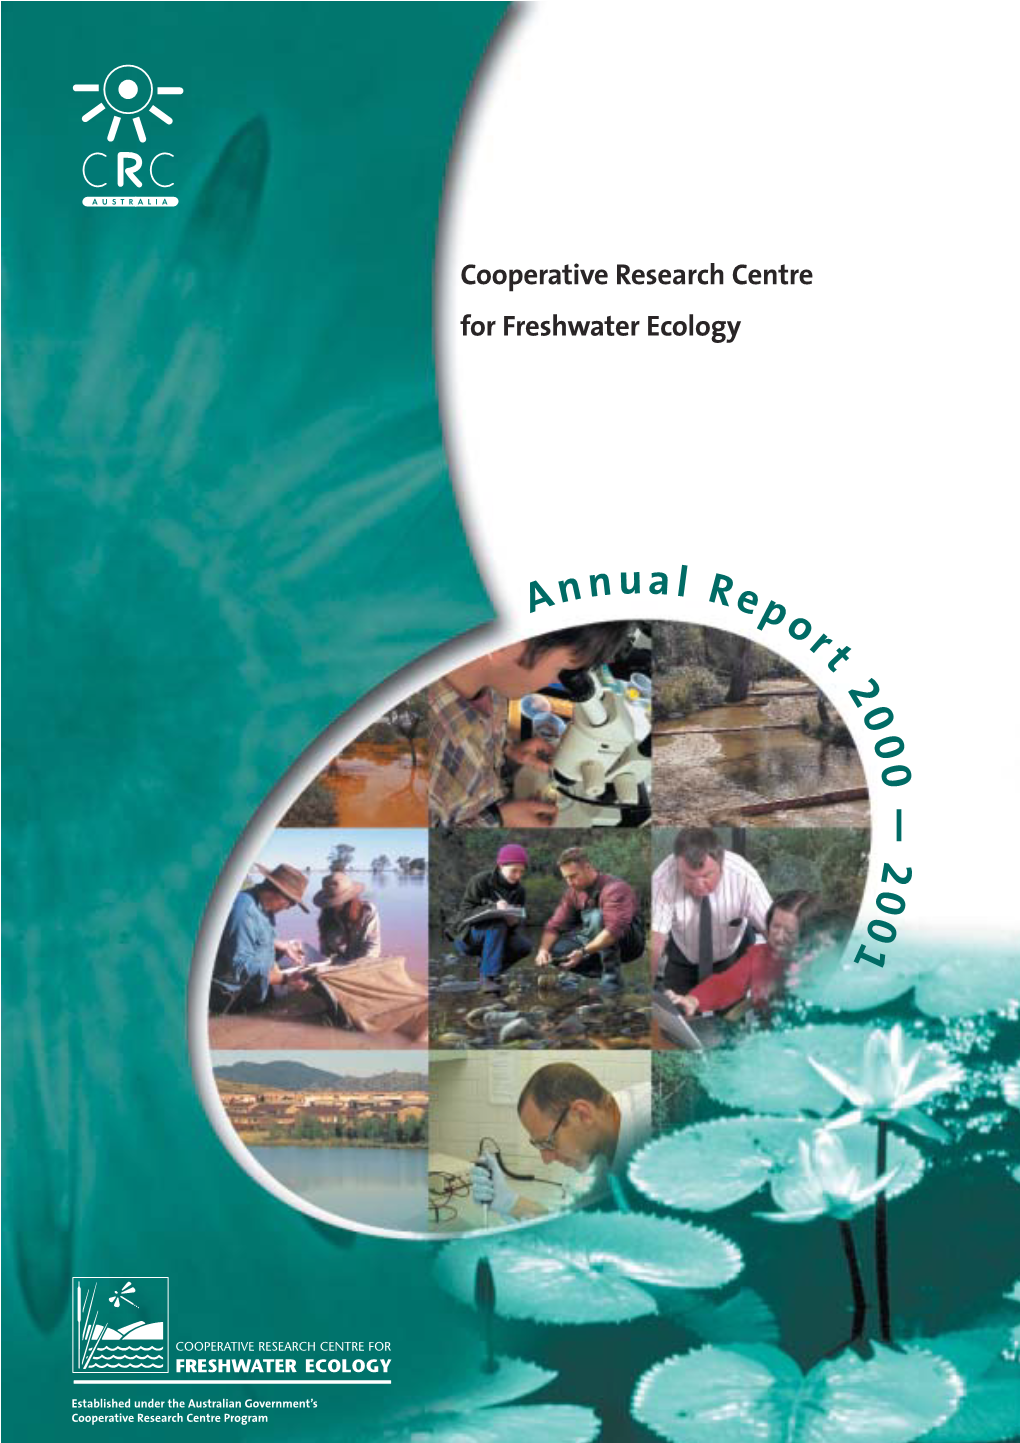 Annual Report 2000 - 2001 CHAPTER 1: CHIEF EXECUTIVE’S REPORT